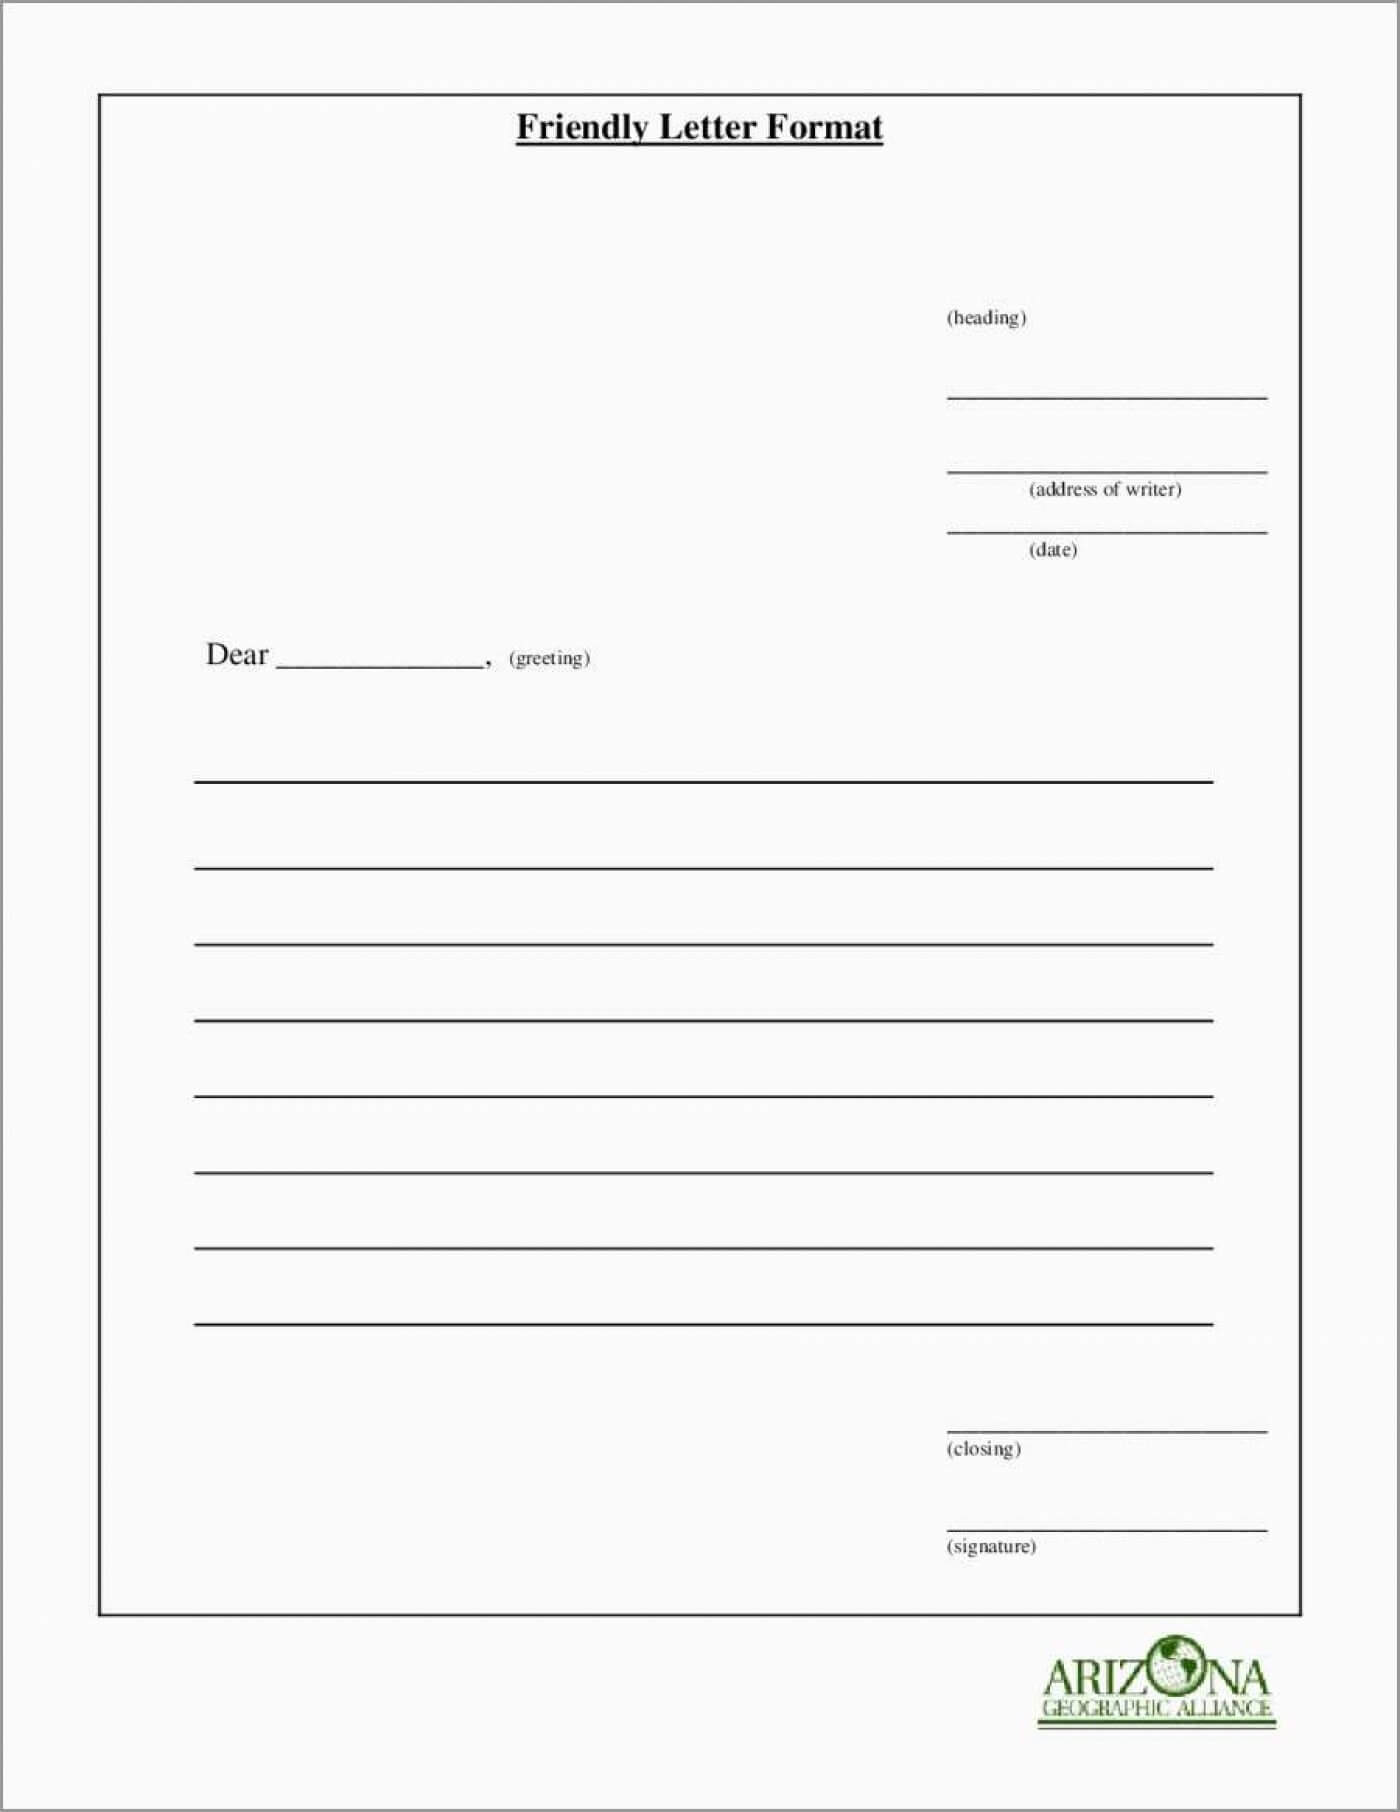 010 Free Letter Writing Template Best Ideas Hindi Format Pdf For Blank Letter Writing Template For Kids